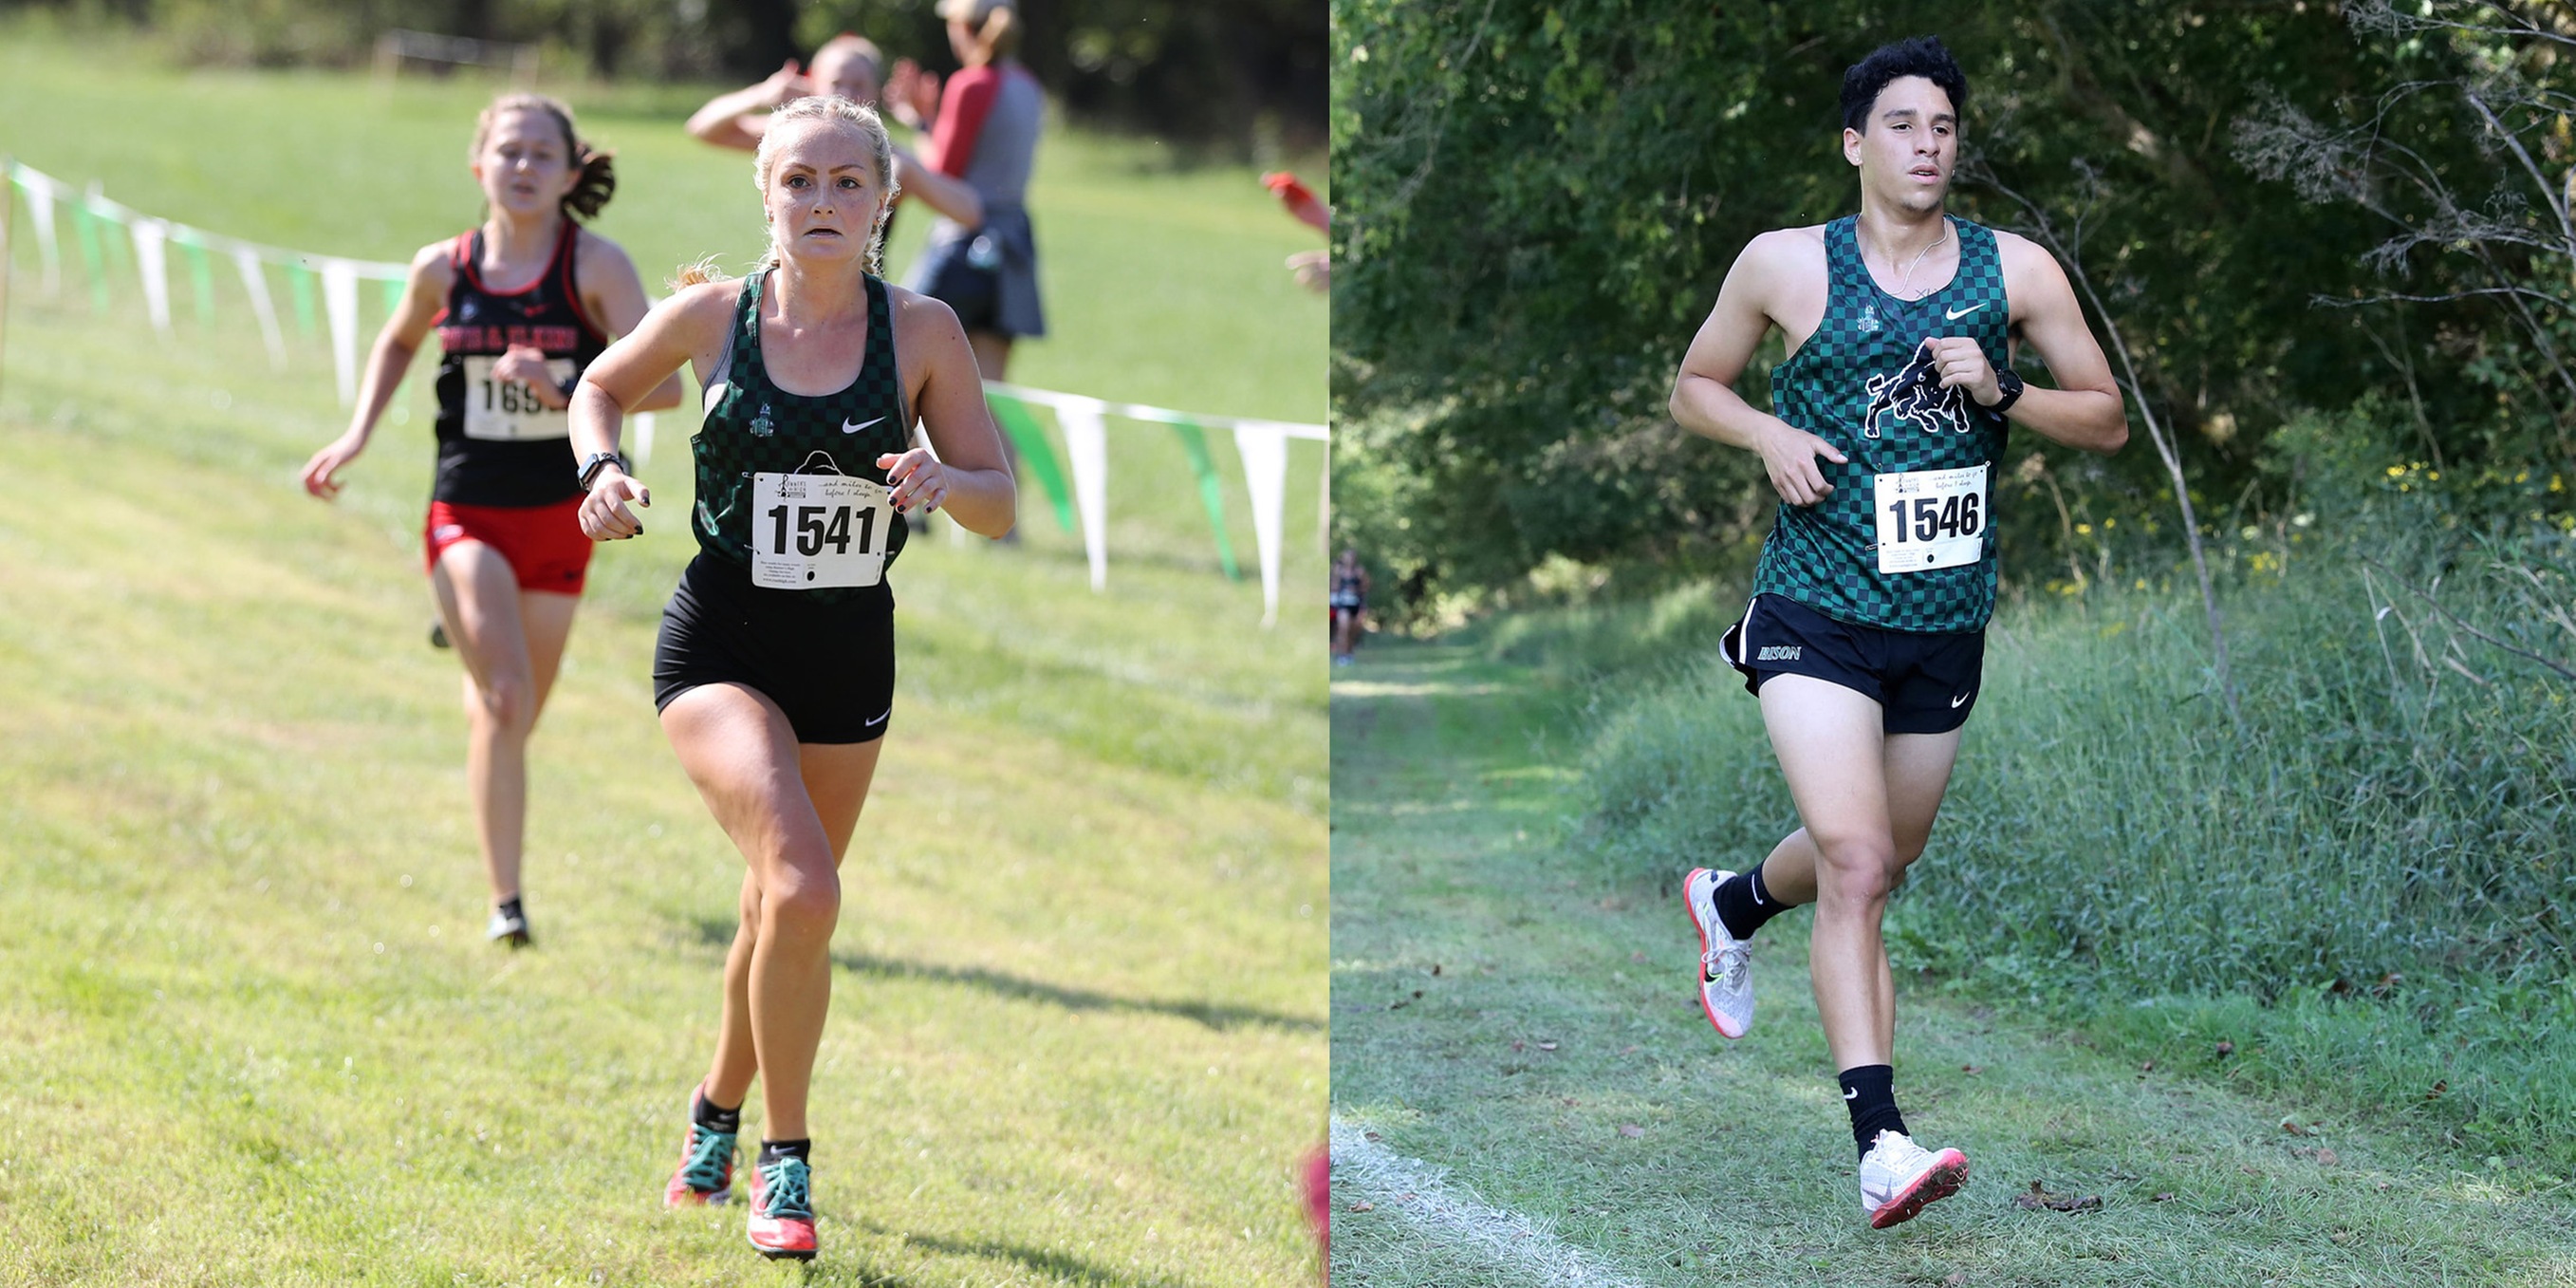 PAC Releases Preseason Polls and Runners to Watch